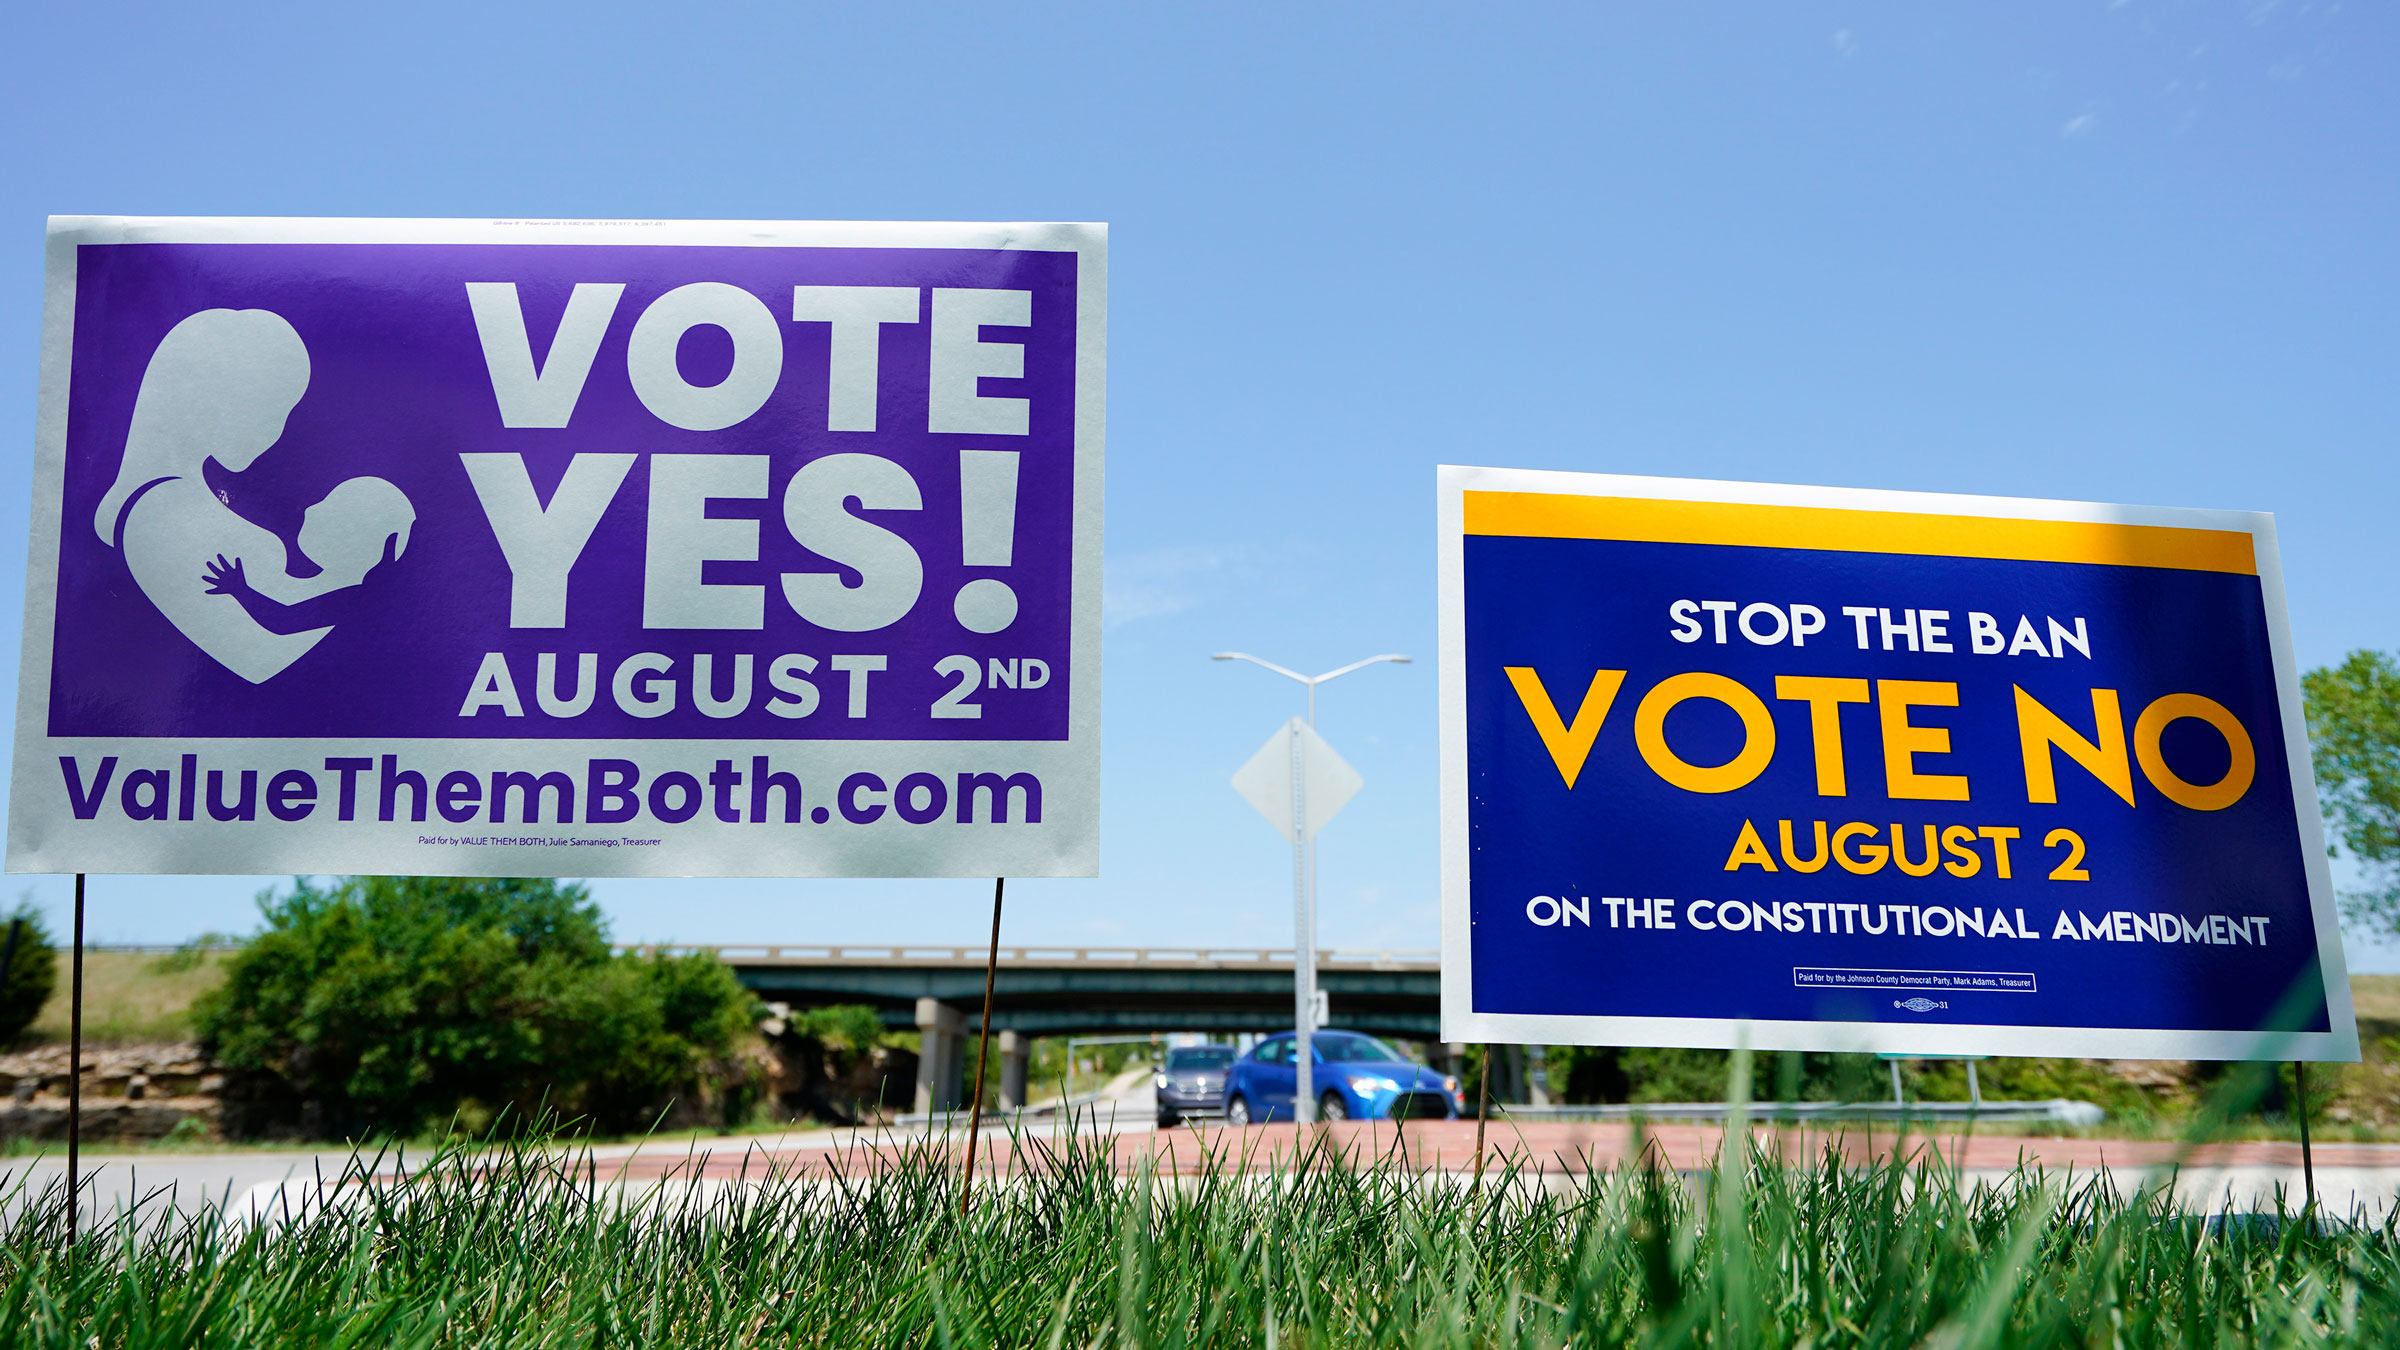 Signs are displayed by a road in Lenexa, Kansas, on Monday.